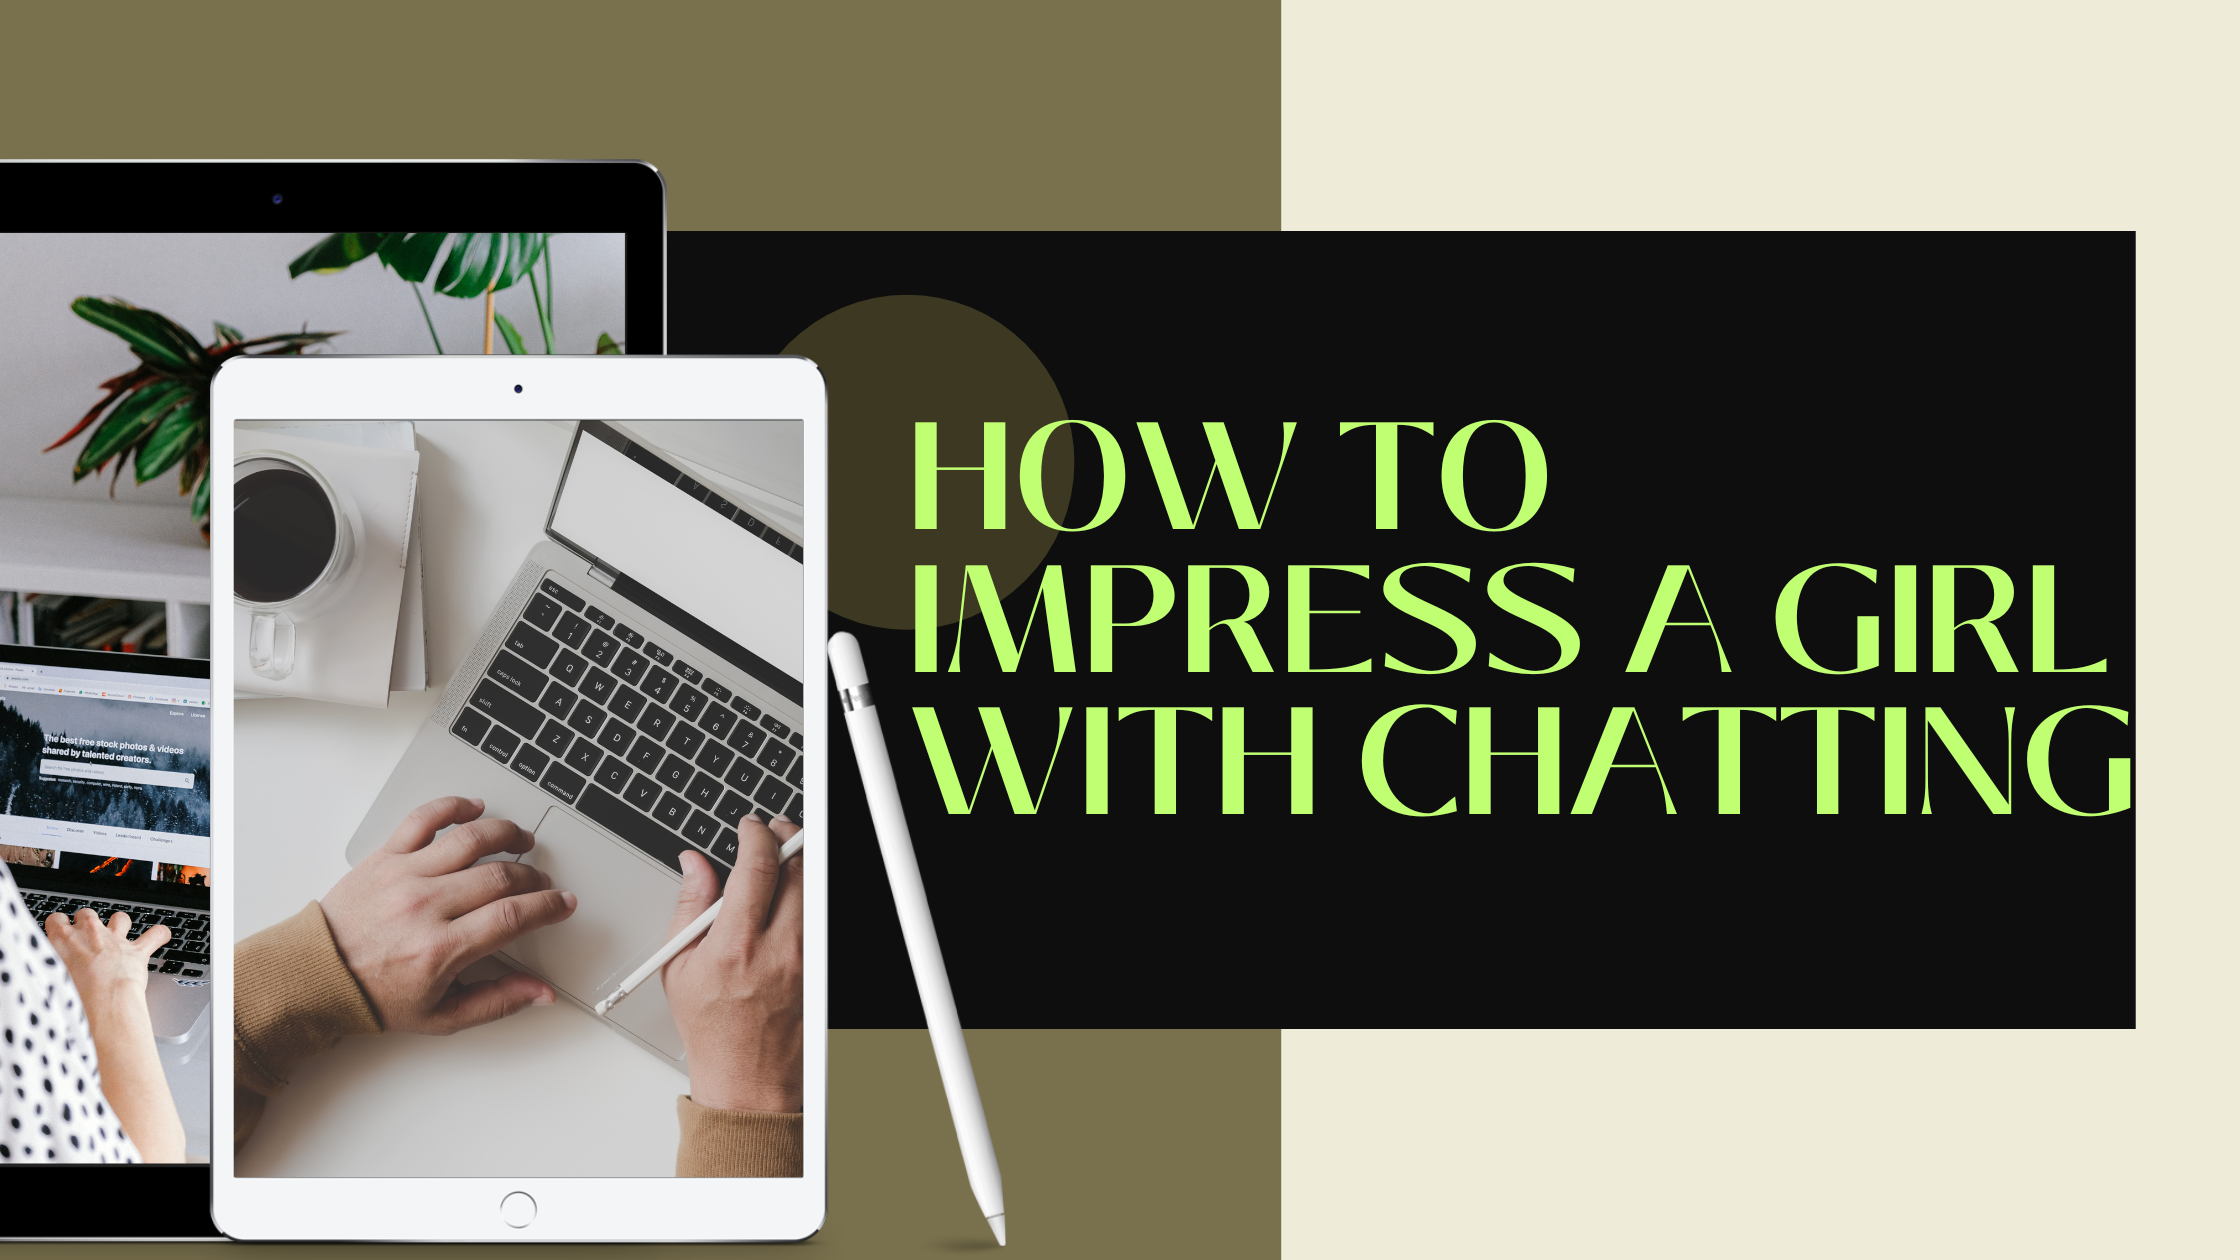 Learn how to impress a girl with chatting